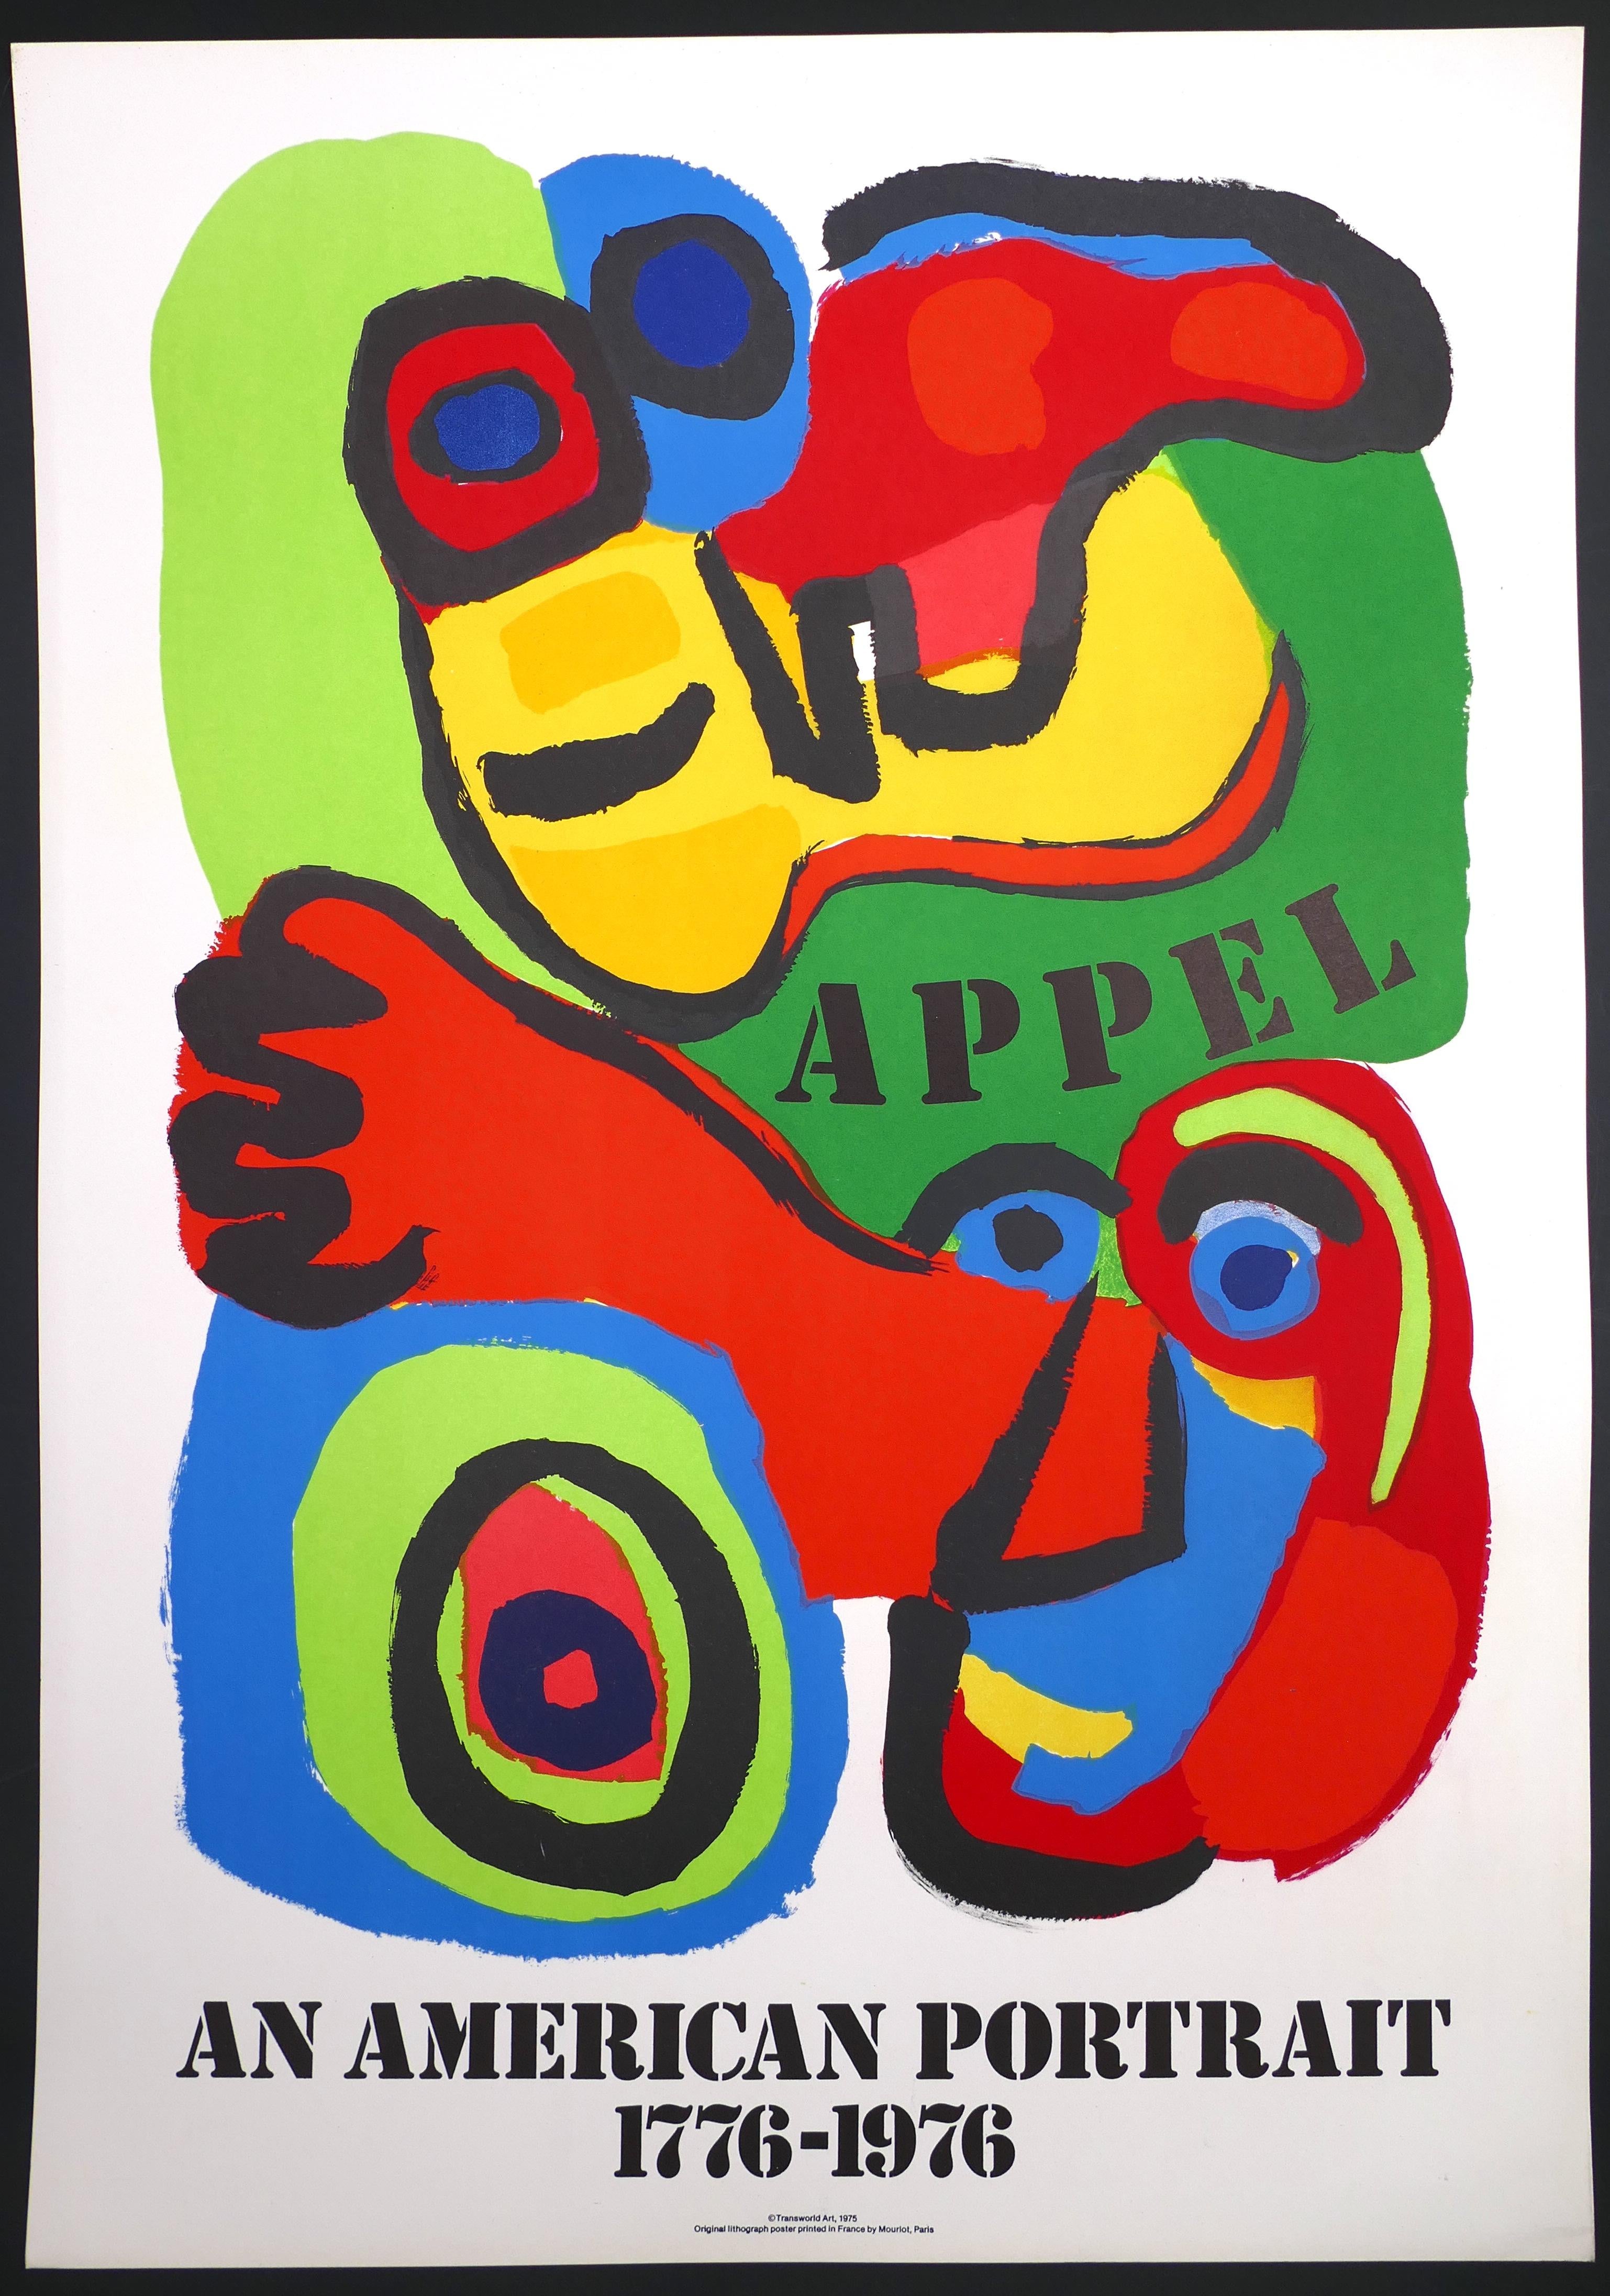 Karel Appel Abstract Print - An American Portrait - Vintage Poster Lithographic Poster - 1975